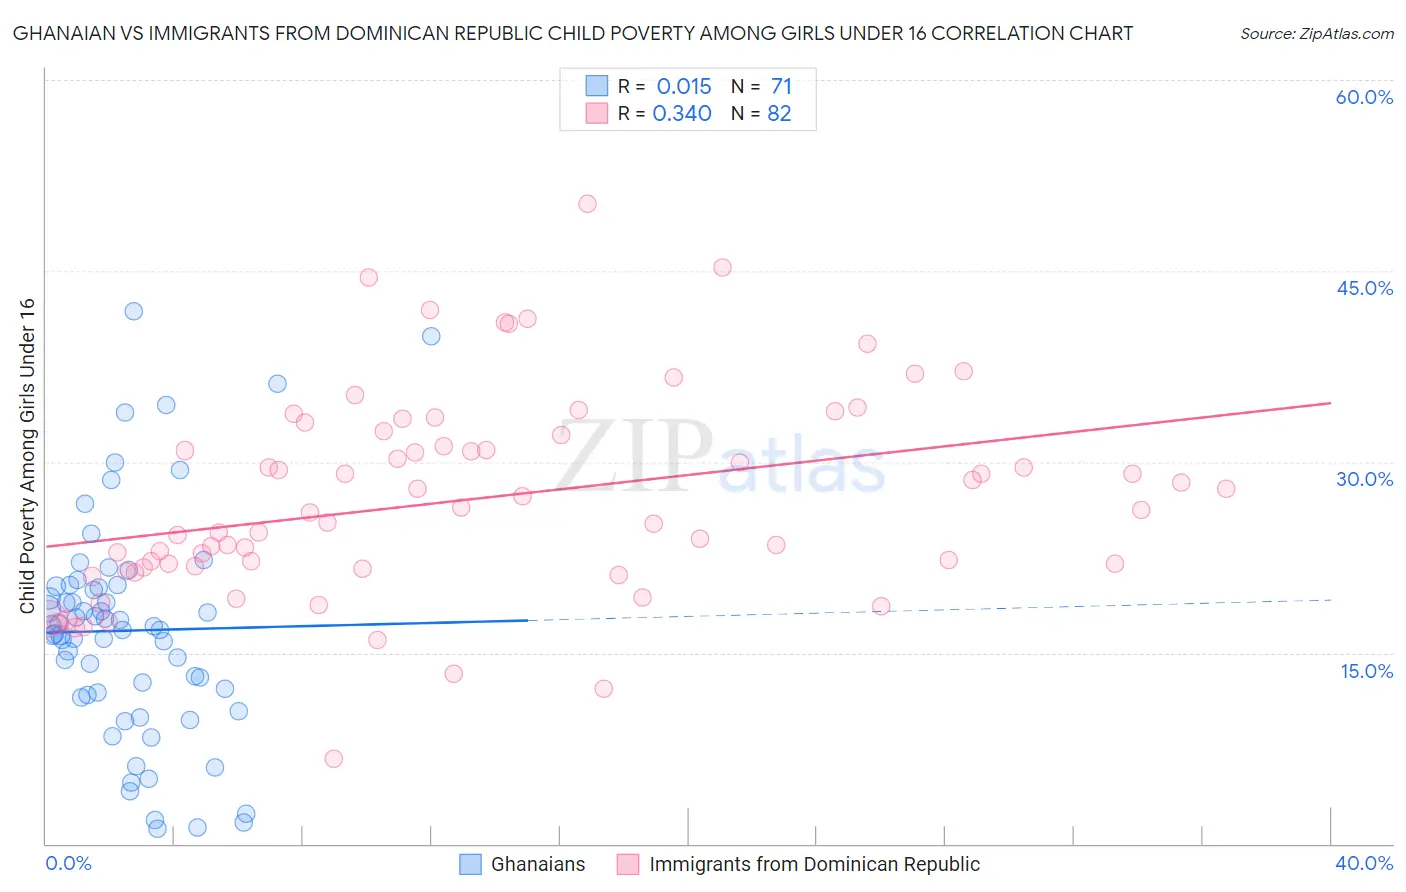 Ghanaian vs Immigrants from Dominican Republic Child Poverty Among Girls Under 16